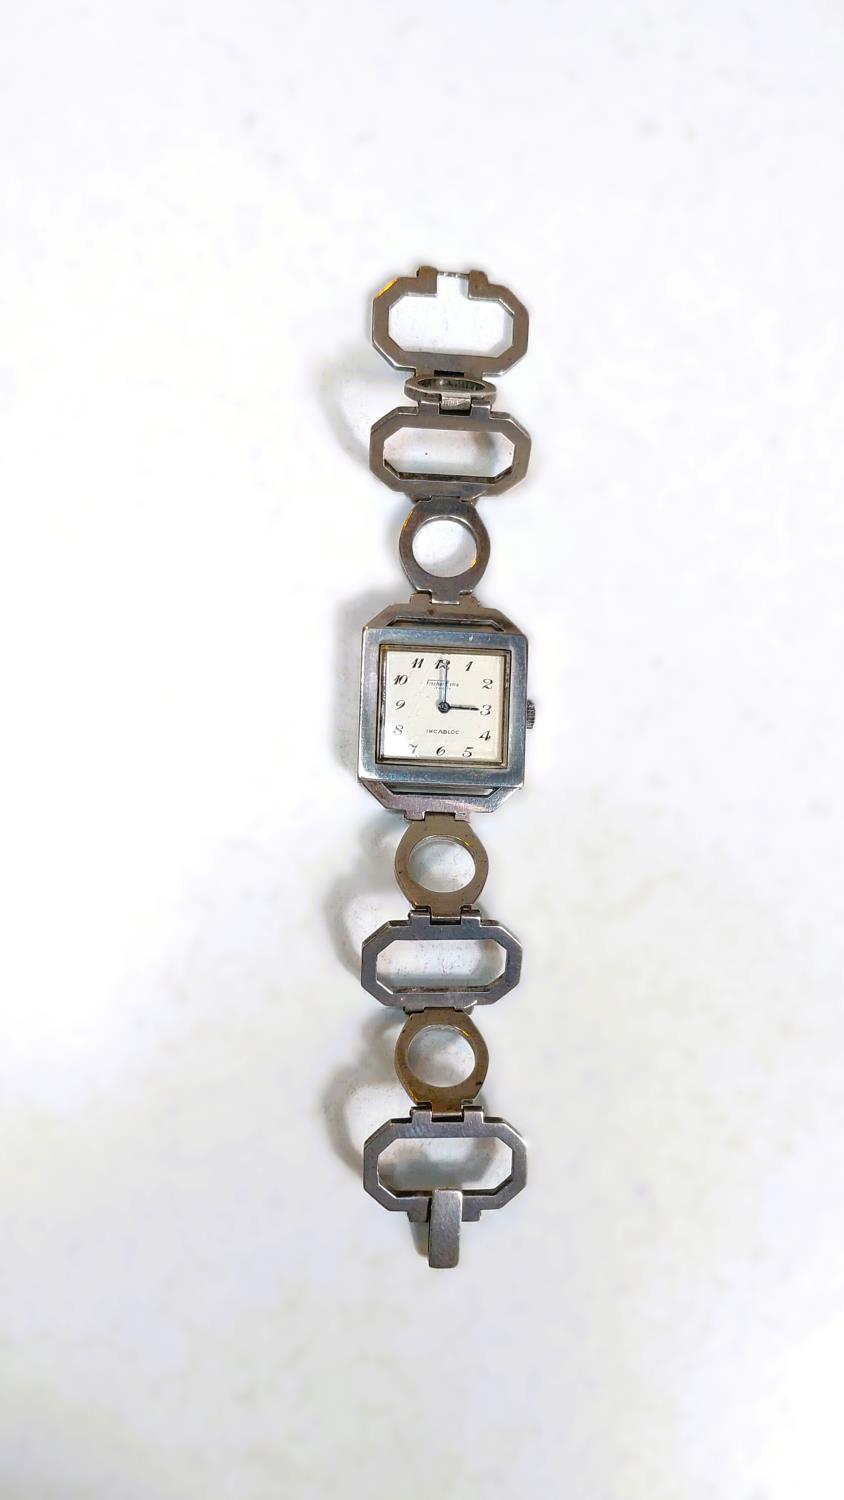 A 1970 Fisher Extra white metal watch in the manor of Roy King, loop bracelet